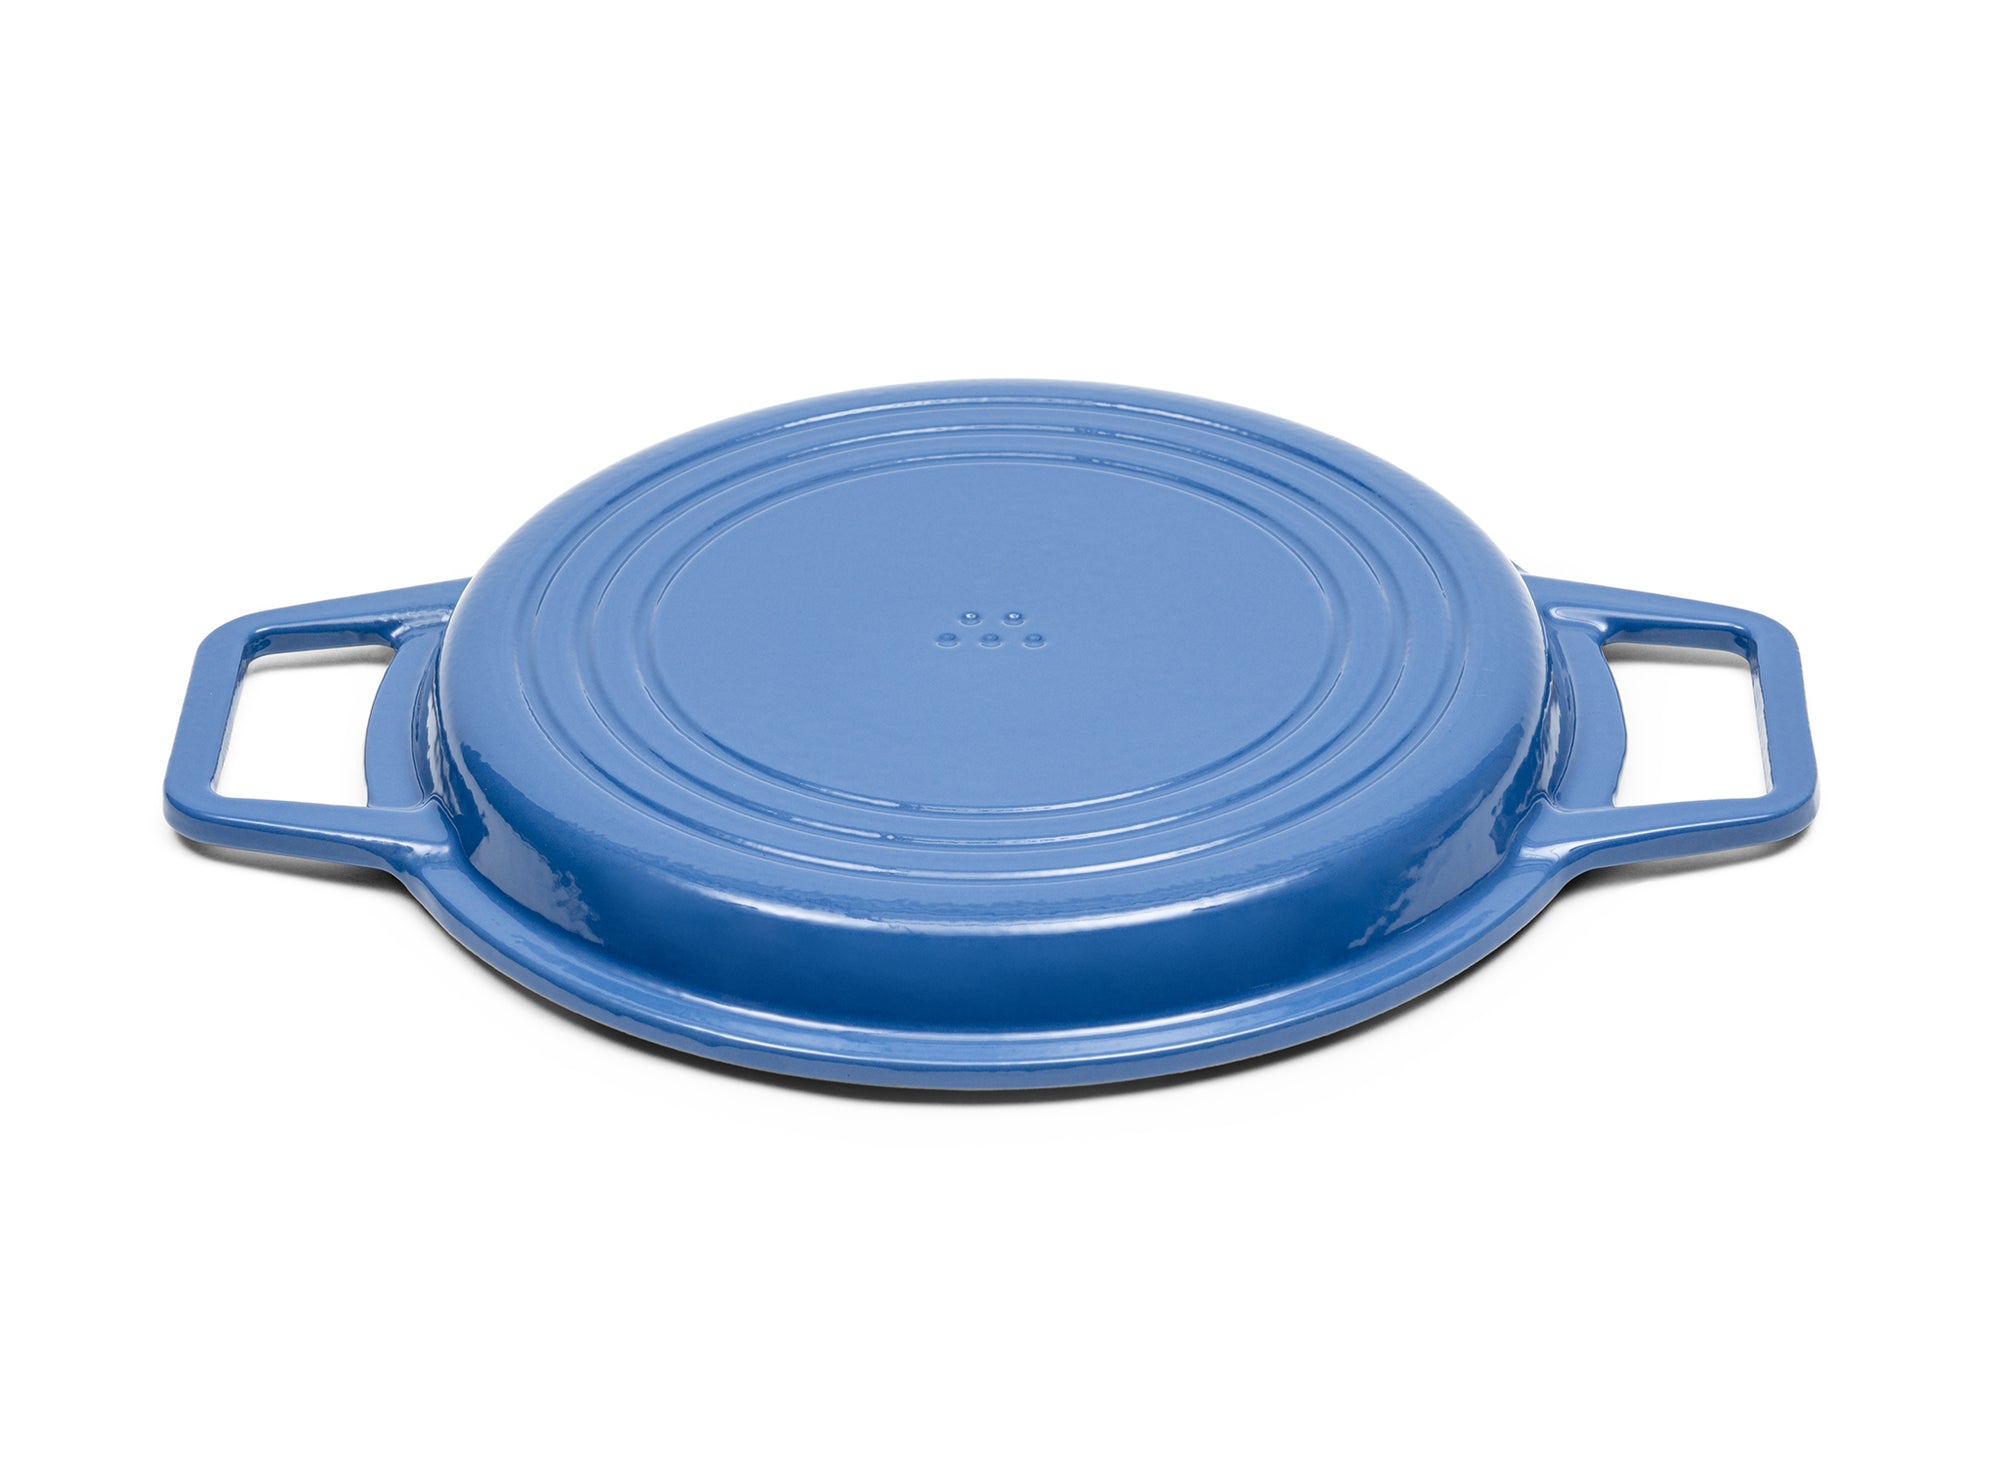 Blue Grill Lid for 7-quart Dutch oven face down on white background.